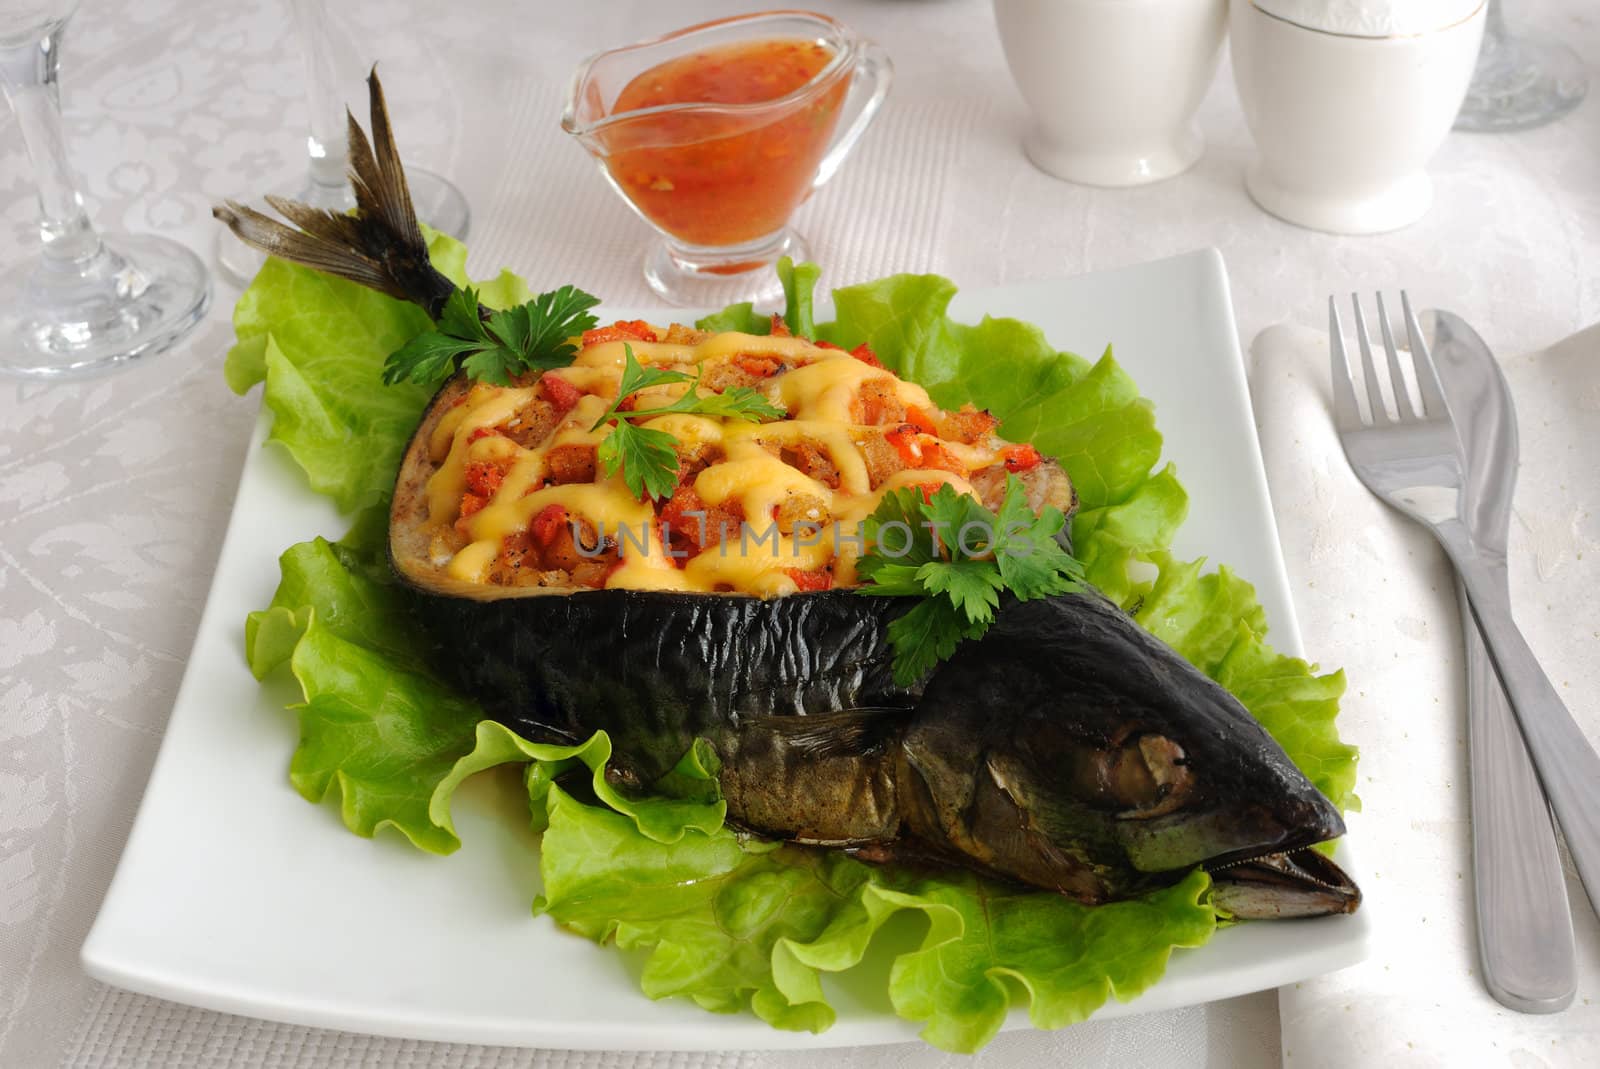 The fish (mackerel), stuffed with vegetables and cheese